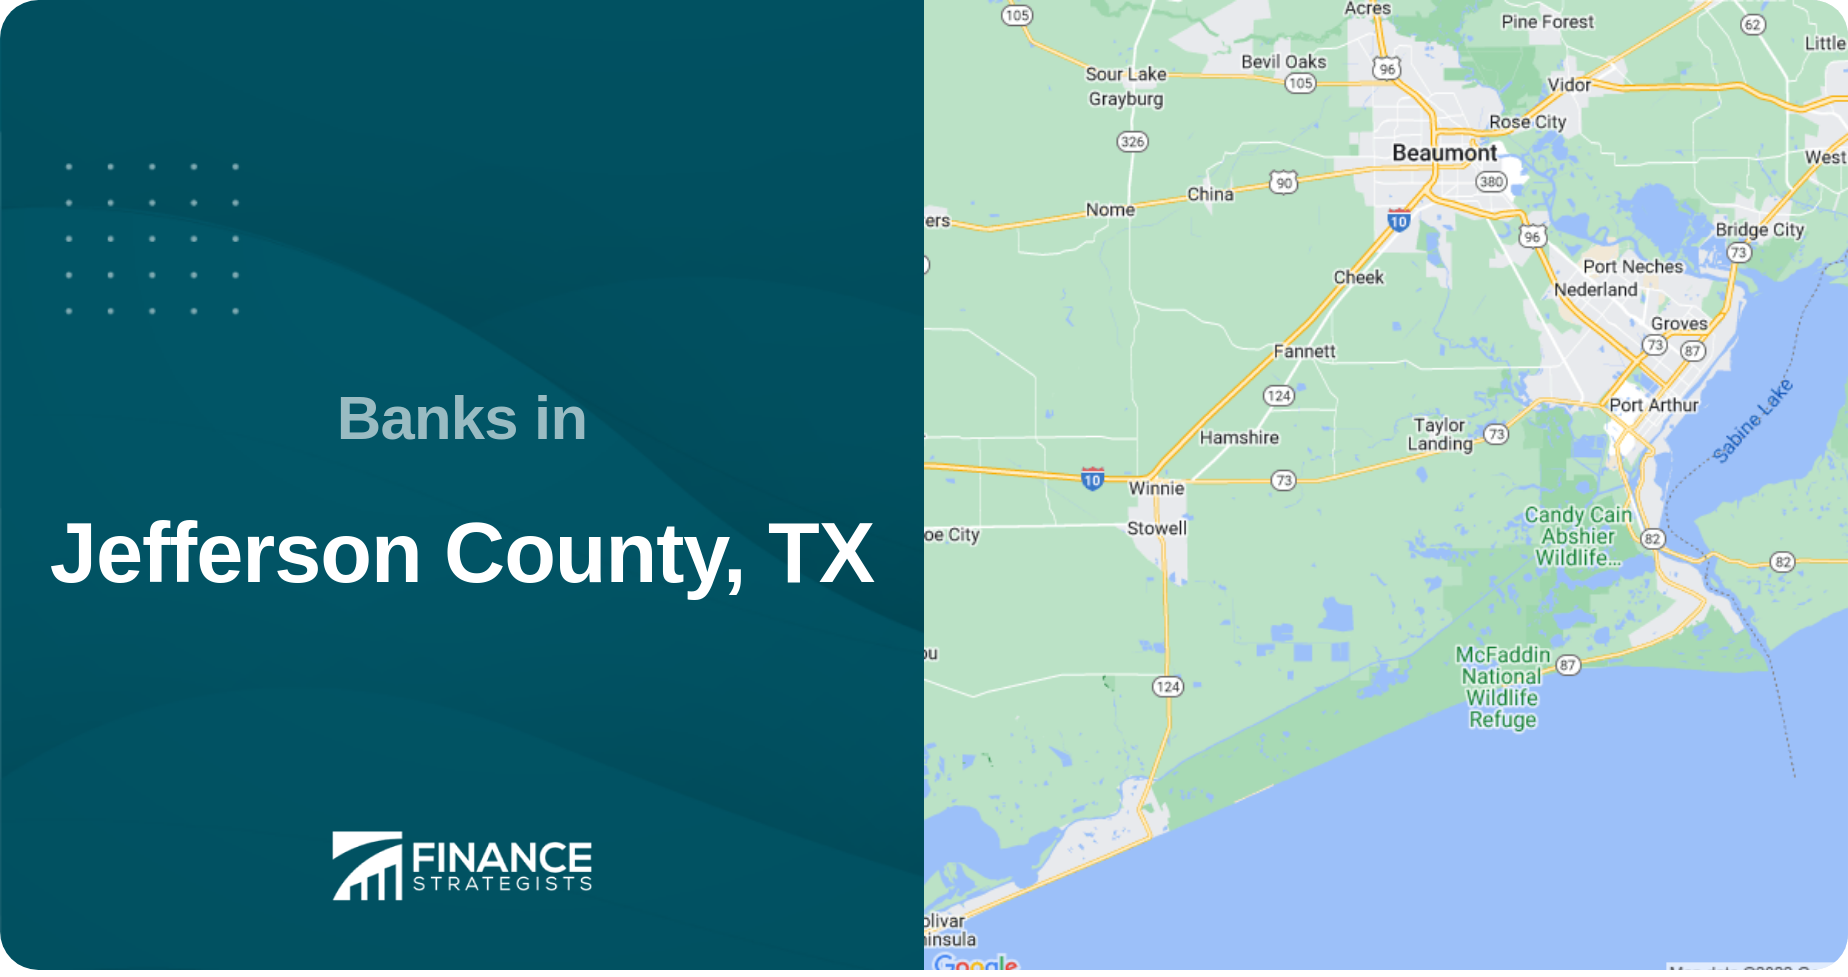 Banks in Jefferson County, TX